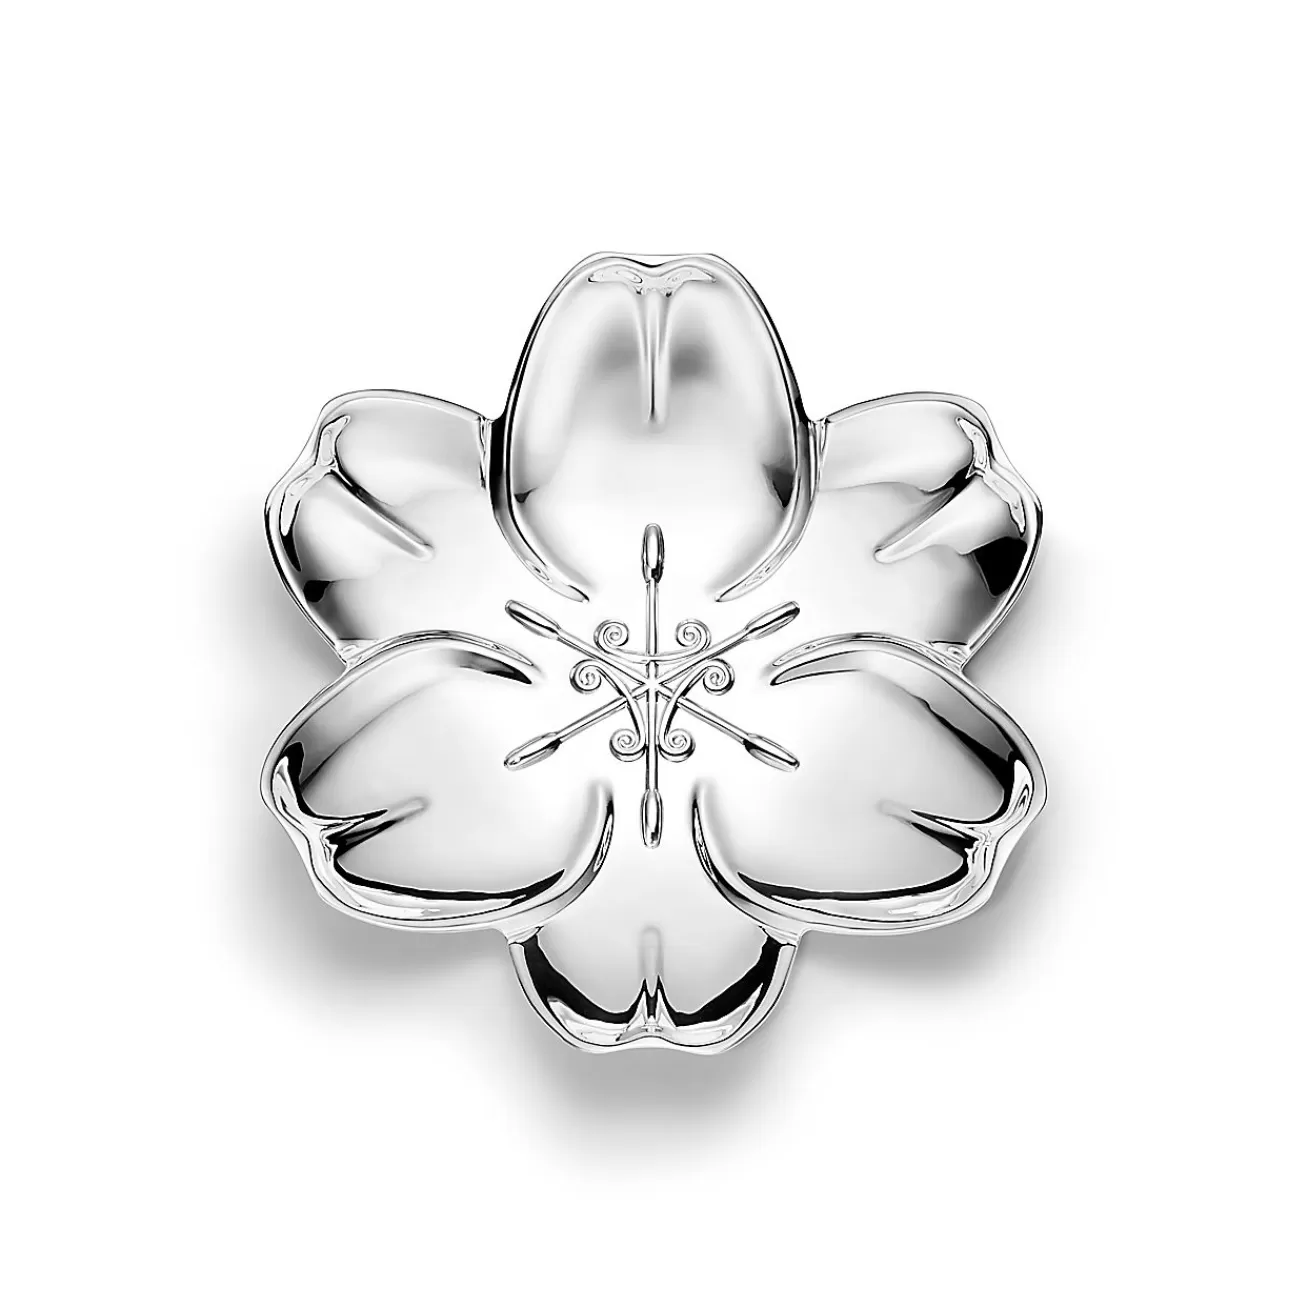 Tiffany & Co. Tiffany Home Essentials Tulip Vide Poche in Sterling Silver | ^ The Home | Housewarming Gifts